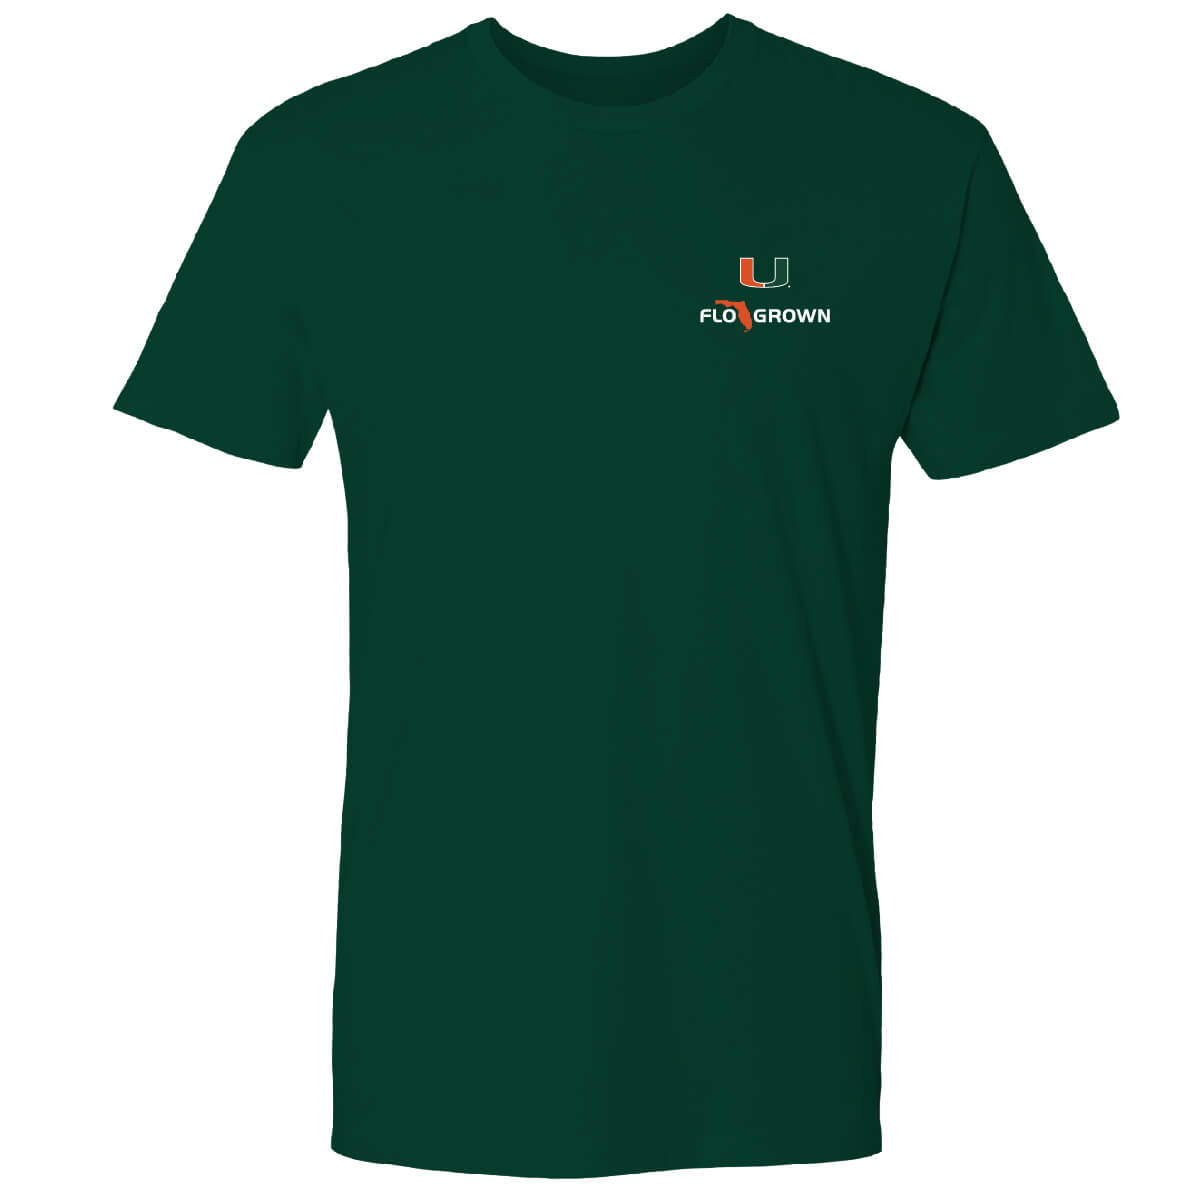 Miami Hurricanes Trolling Flag Tee - Front